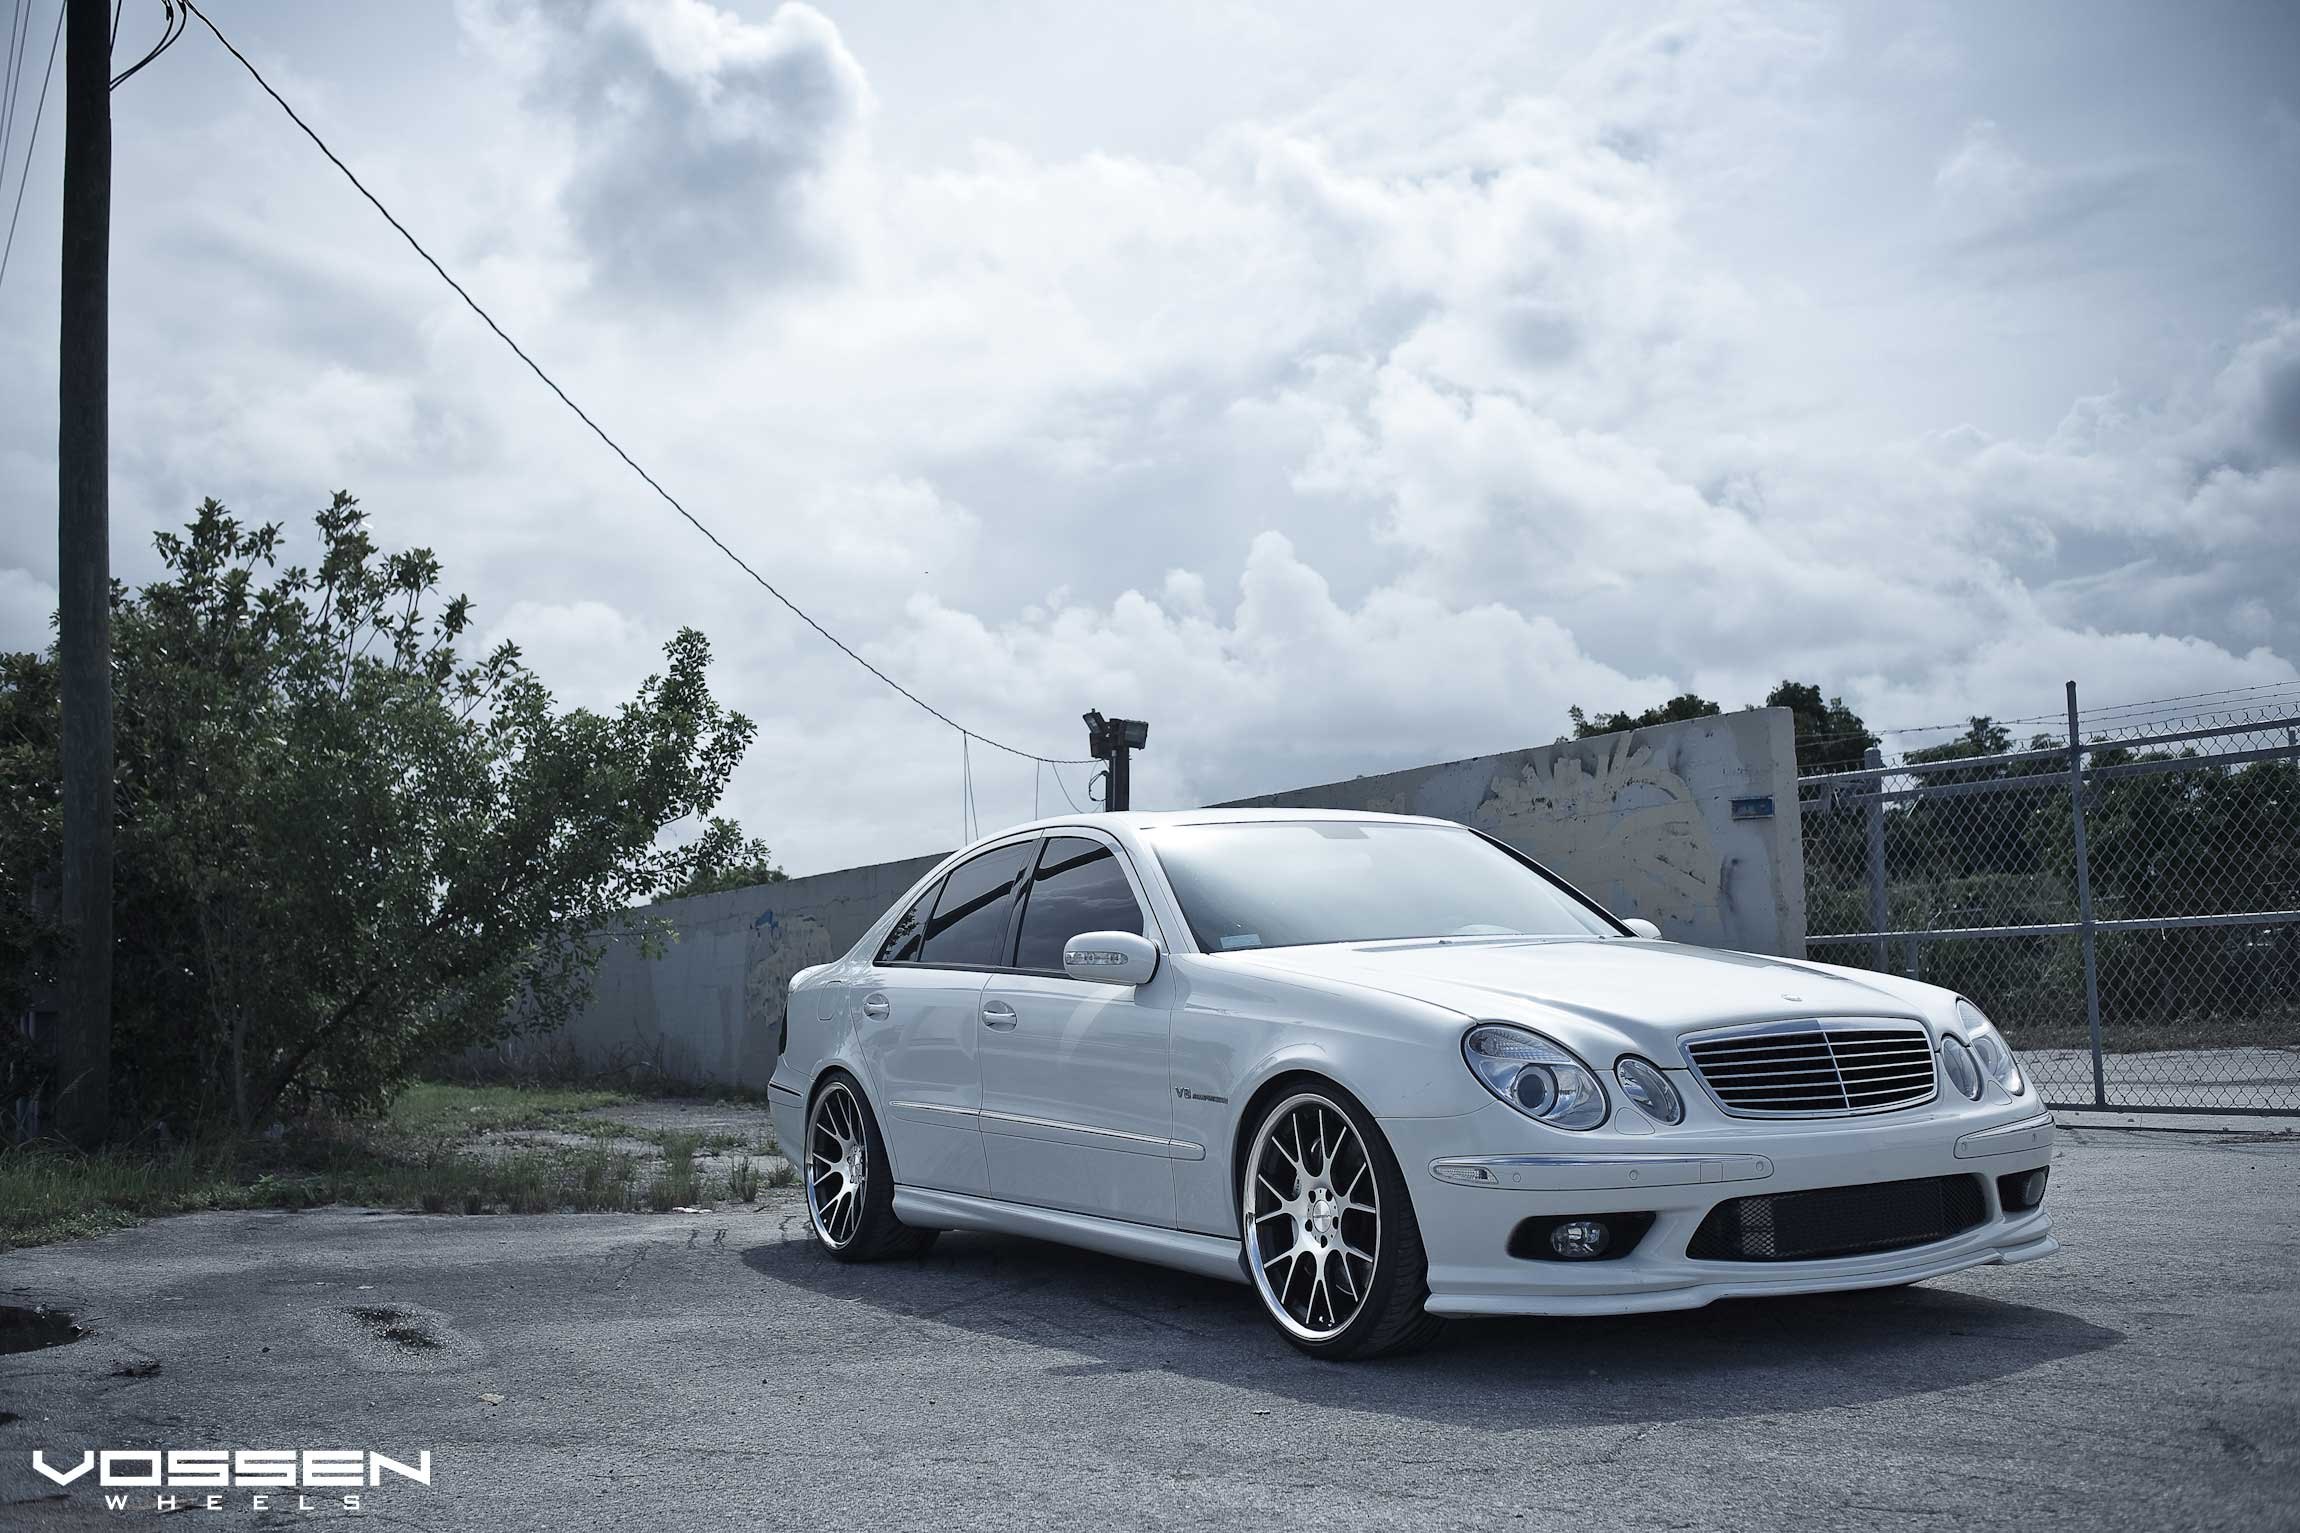 Aftermarket Front Lip on White Mercedes E Class - Photo by Vossen